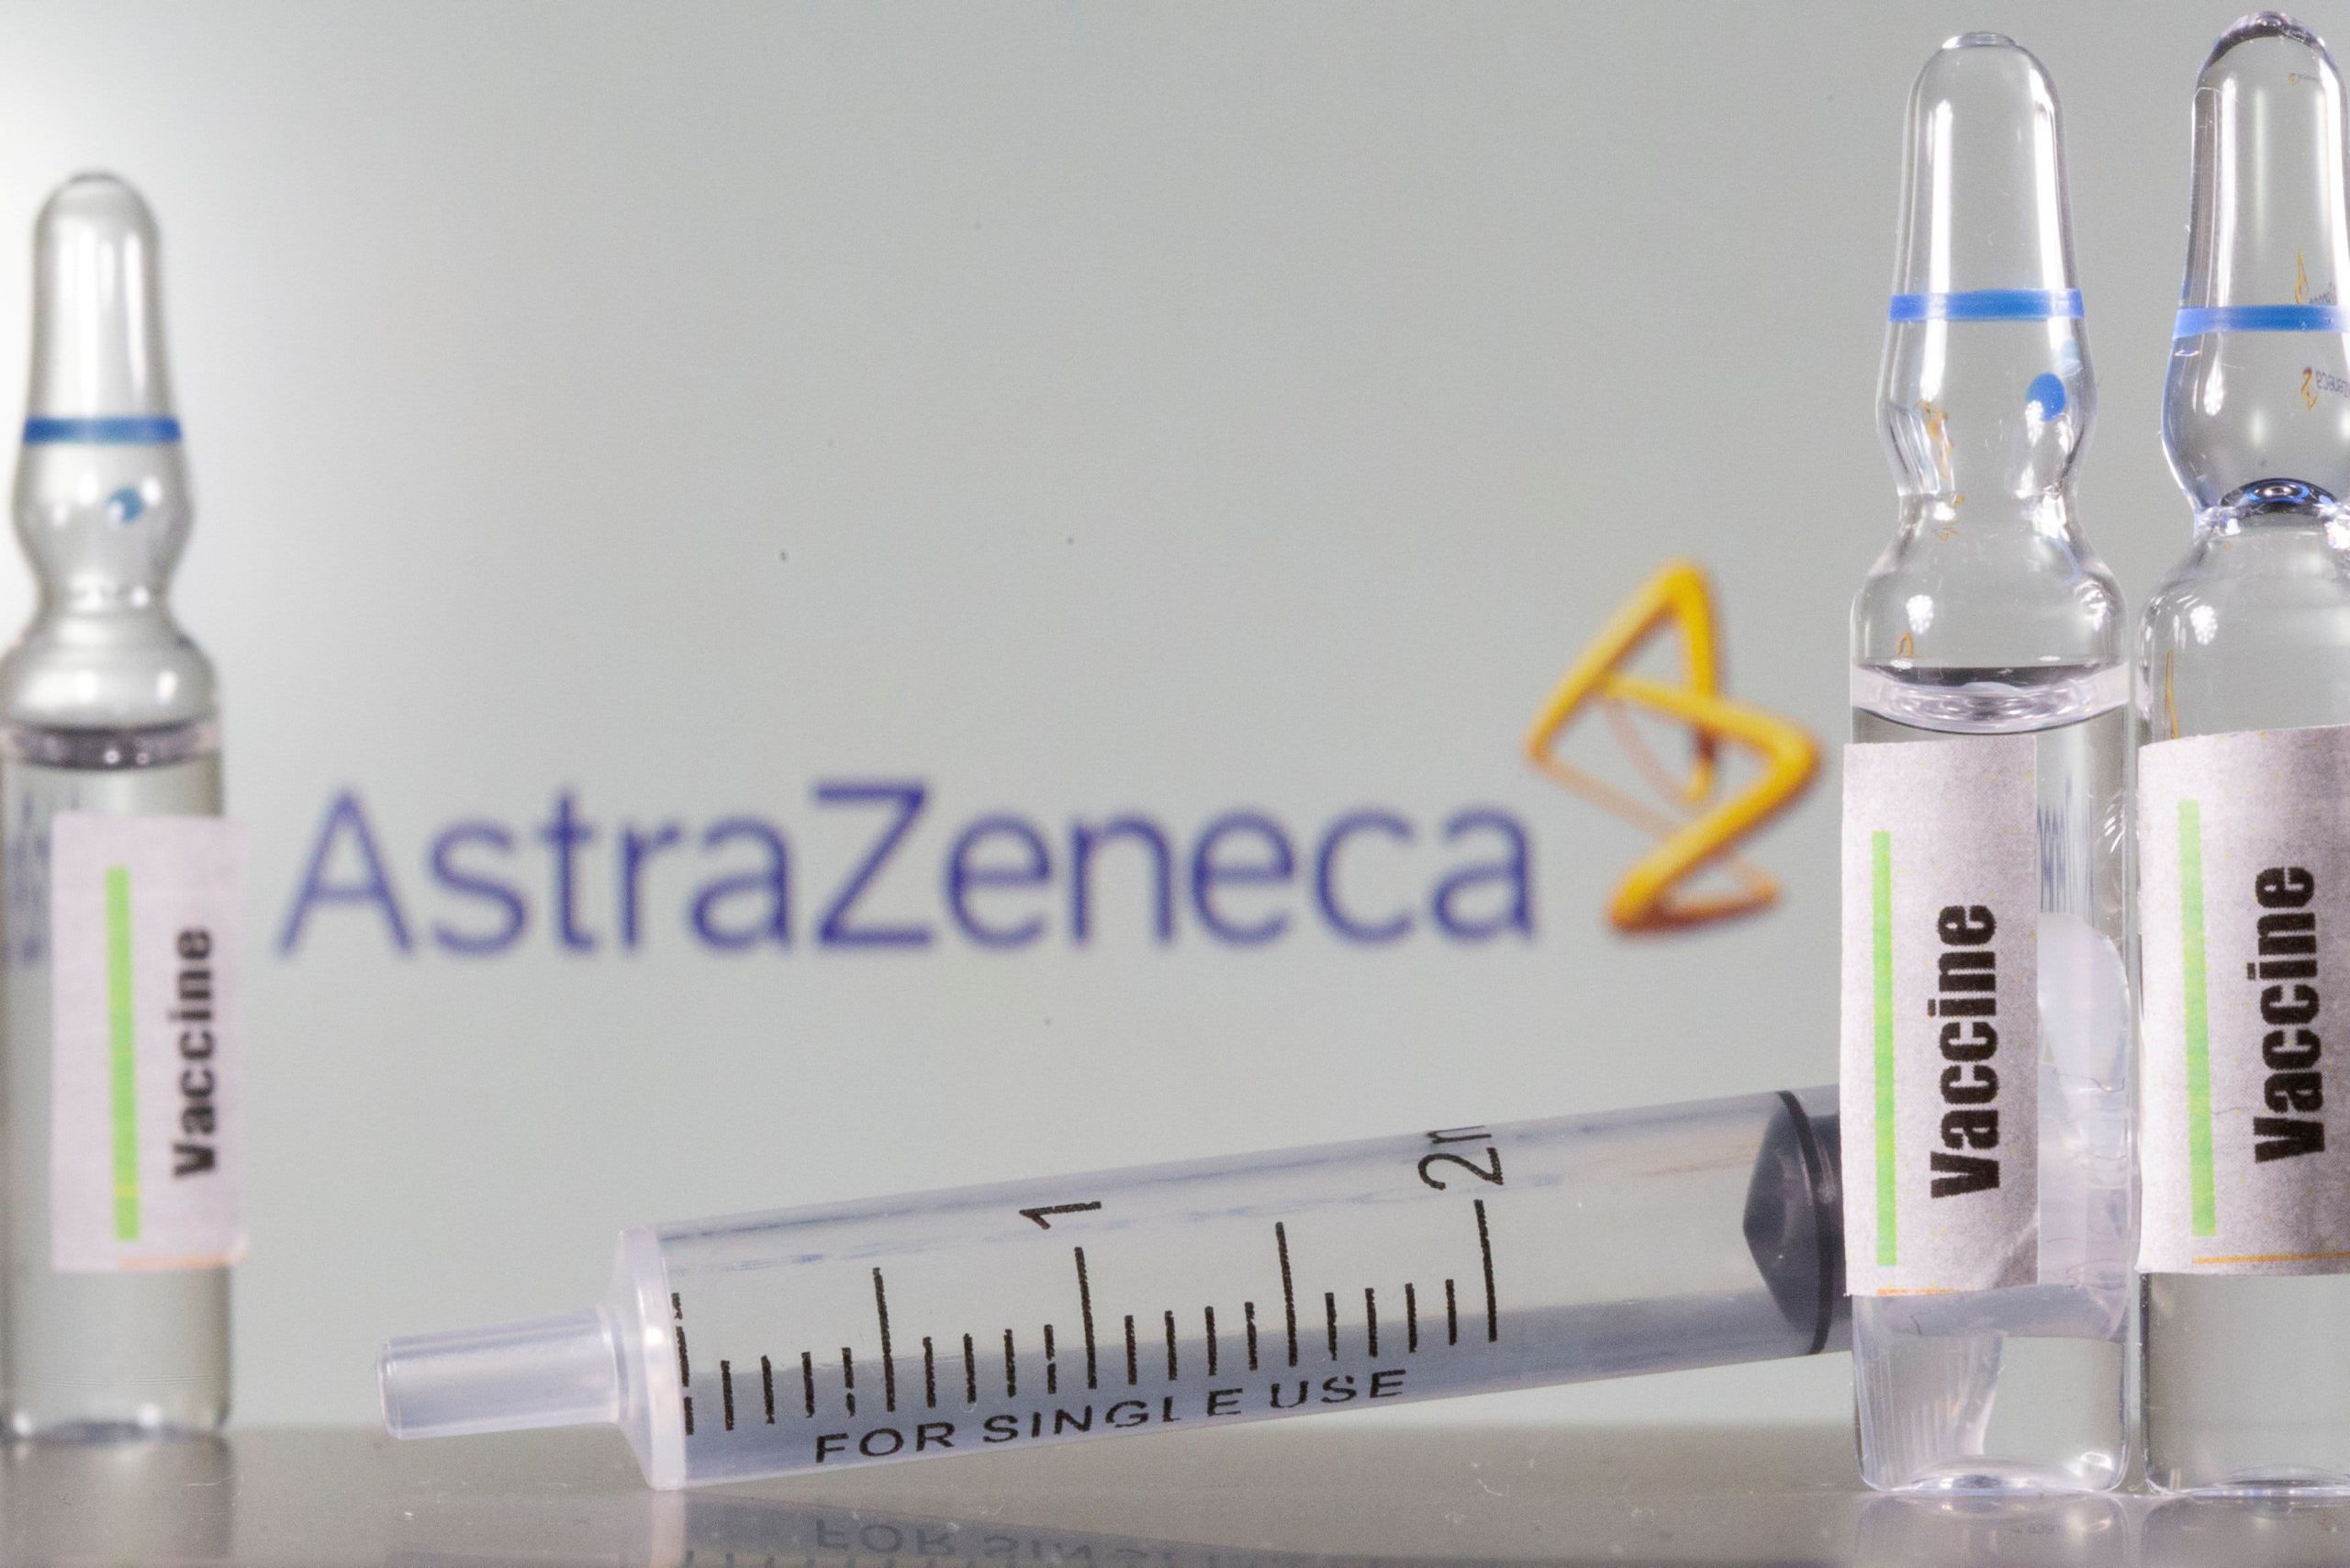 Extra information wanted on AstraZeneca’s Covid vaccine trials